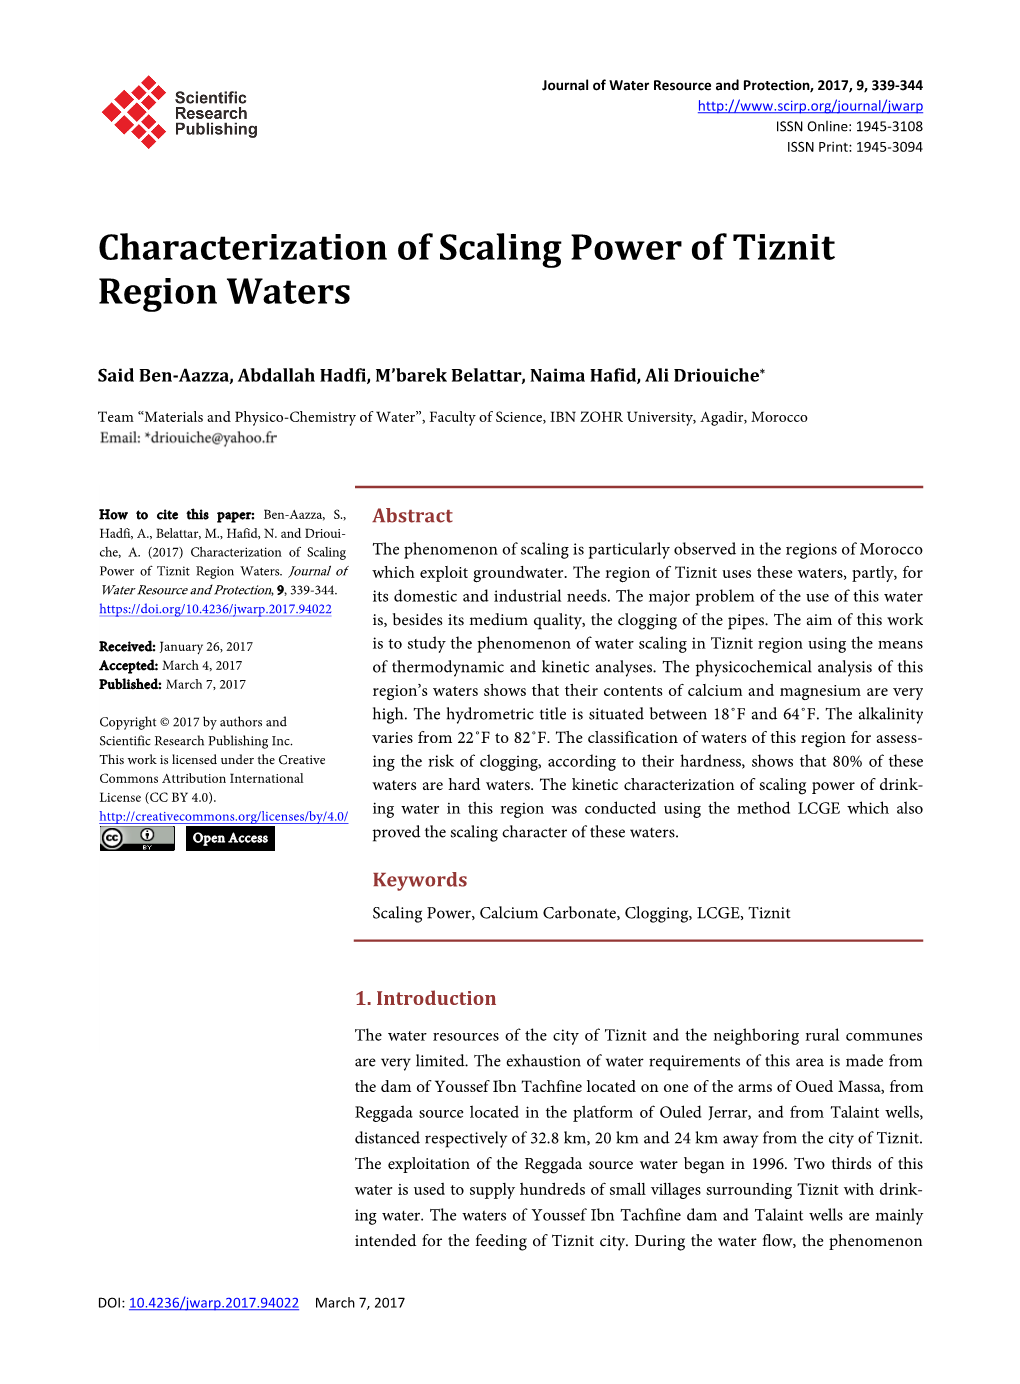 Characterization of Scaling Power of Tiznit Region Waters